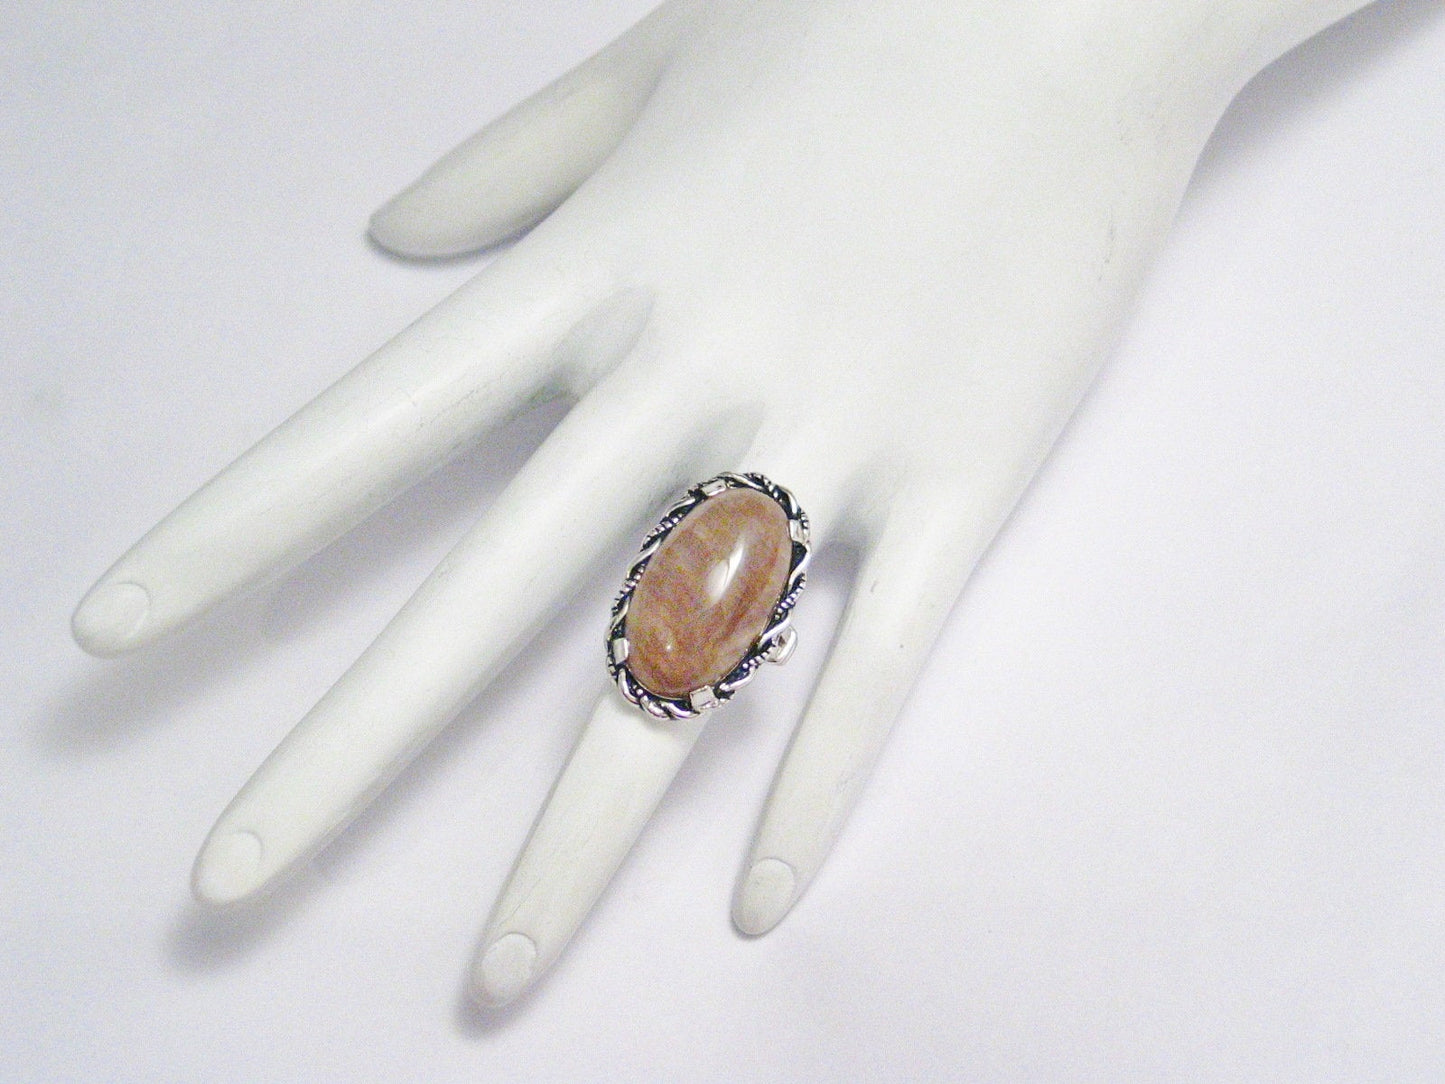 Sterling Silver Ring, Sz4.75 Large Oval Tan Agate Stone Pinky Ring - Blingschlingers Pre-owned Jewelry